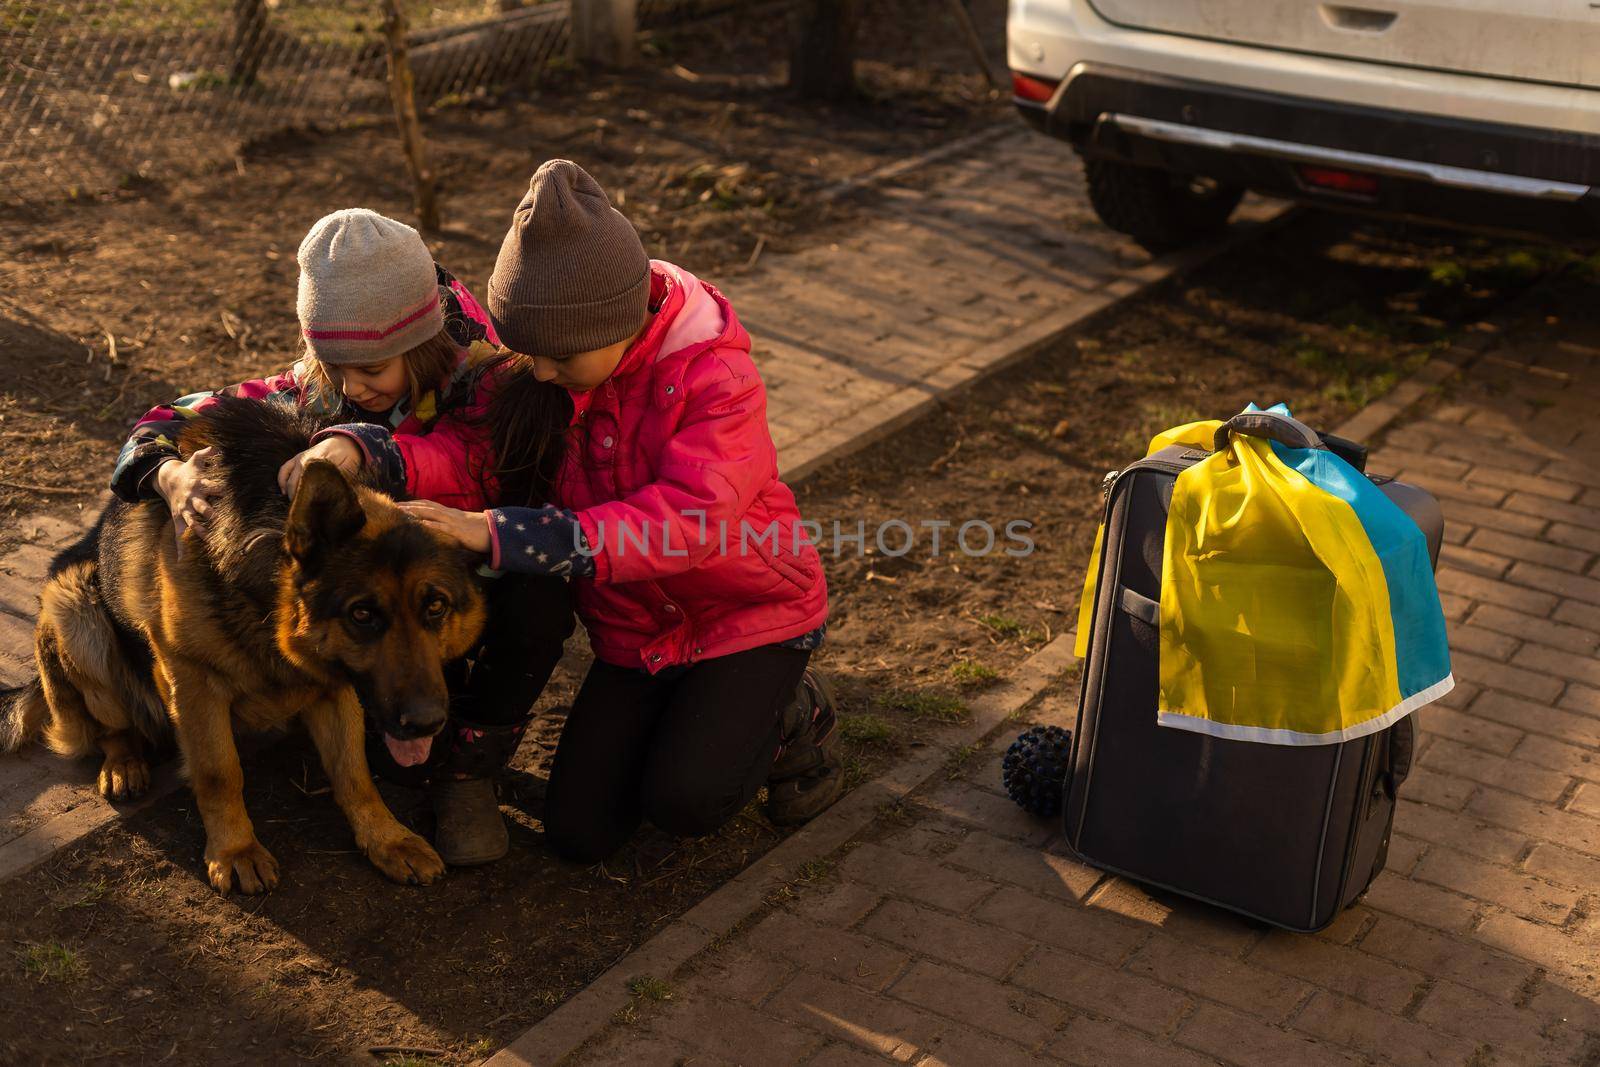 Ukraine military migration. two little girls with a suitcase. Flag of Ukraine, help. Crisis, military conflict by Andelov13